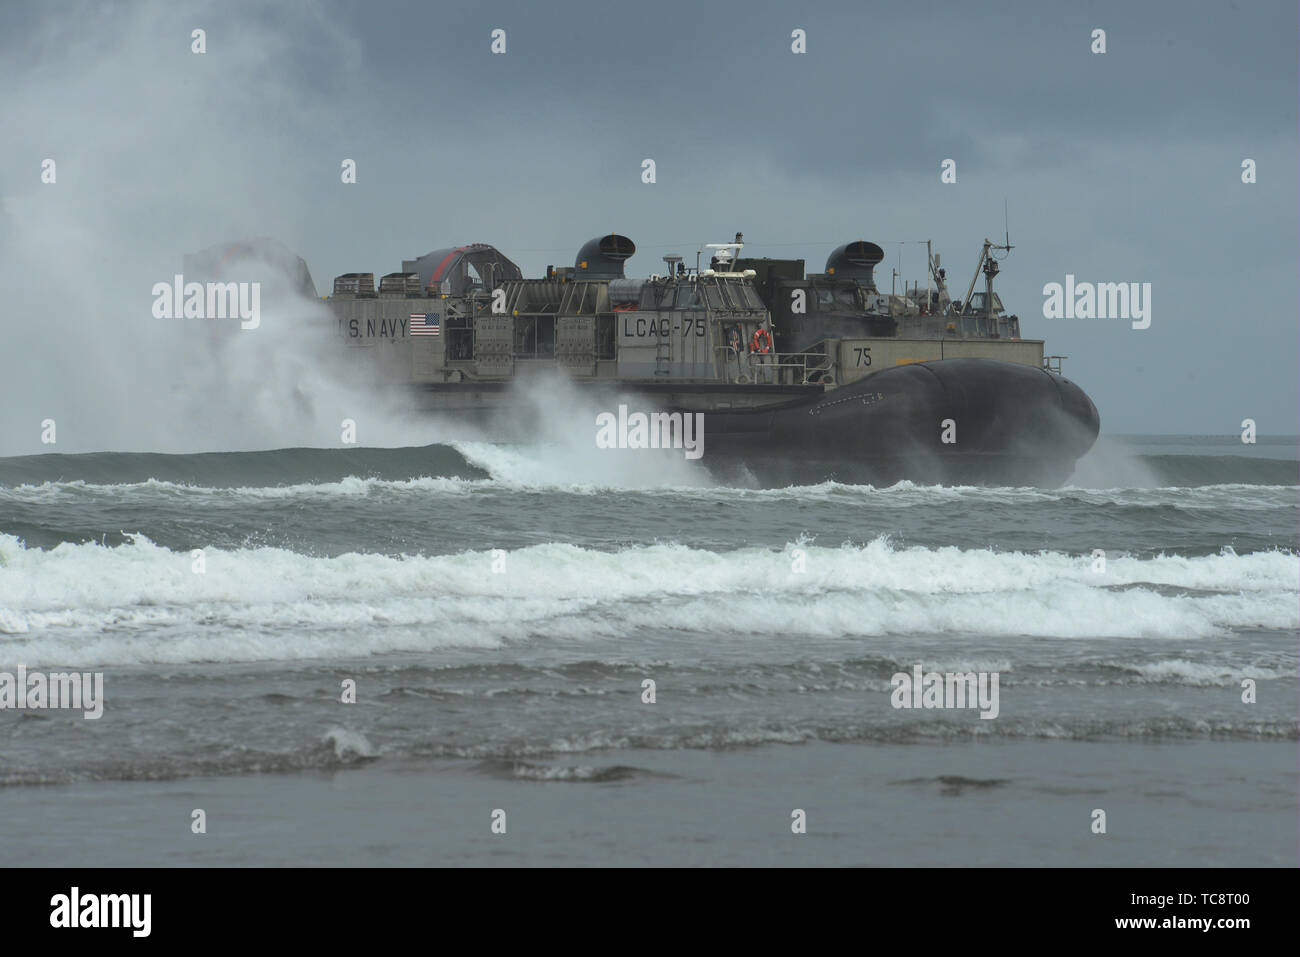 A U.S. Navy (Landing Craft Air Cushion) LCAC-75 comes ashore at the Sunset Beach are near Warrenton, Oregon, June 3, 2019. In addition to the beach landings by the hovercraft vehicles, community leaders, emergency managers, military officials and other first responders toured the U.S.S. Anchorage to learn more about the Navy capabilities to assist in mass casualty scenarios. (National Guard photo by John Hughel, Oregon Military Department) Stock Photo